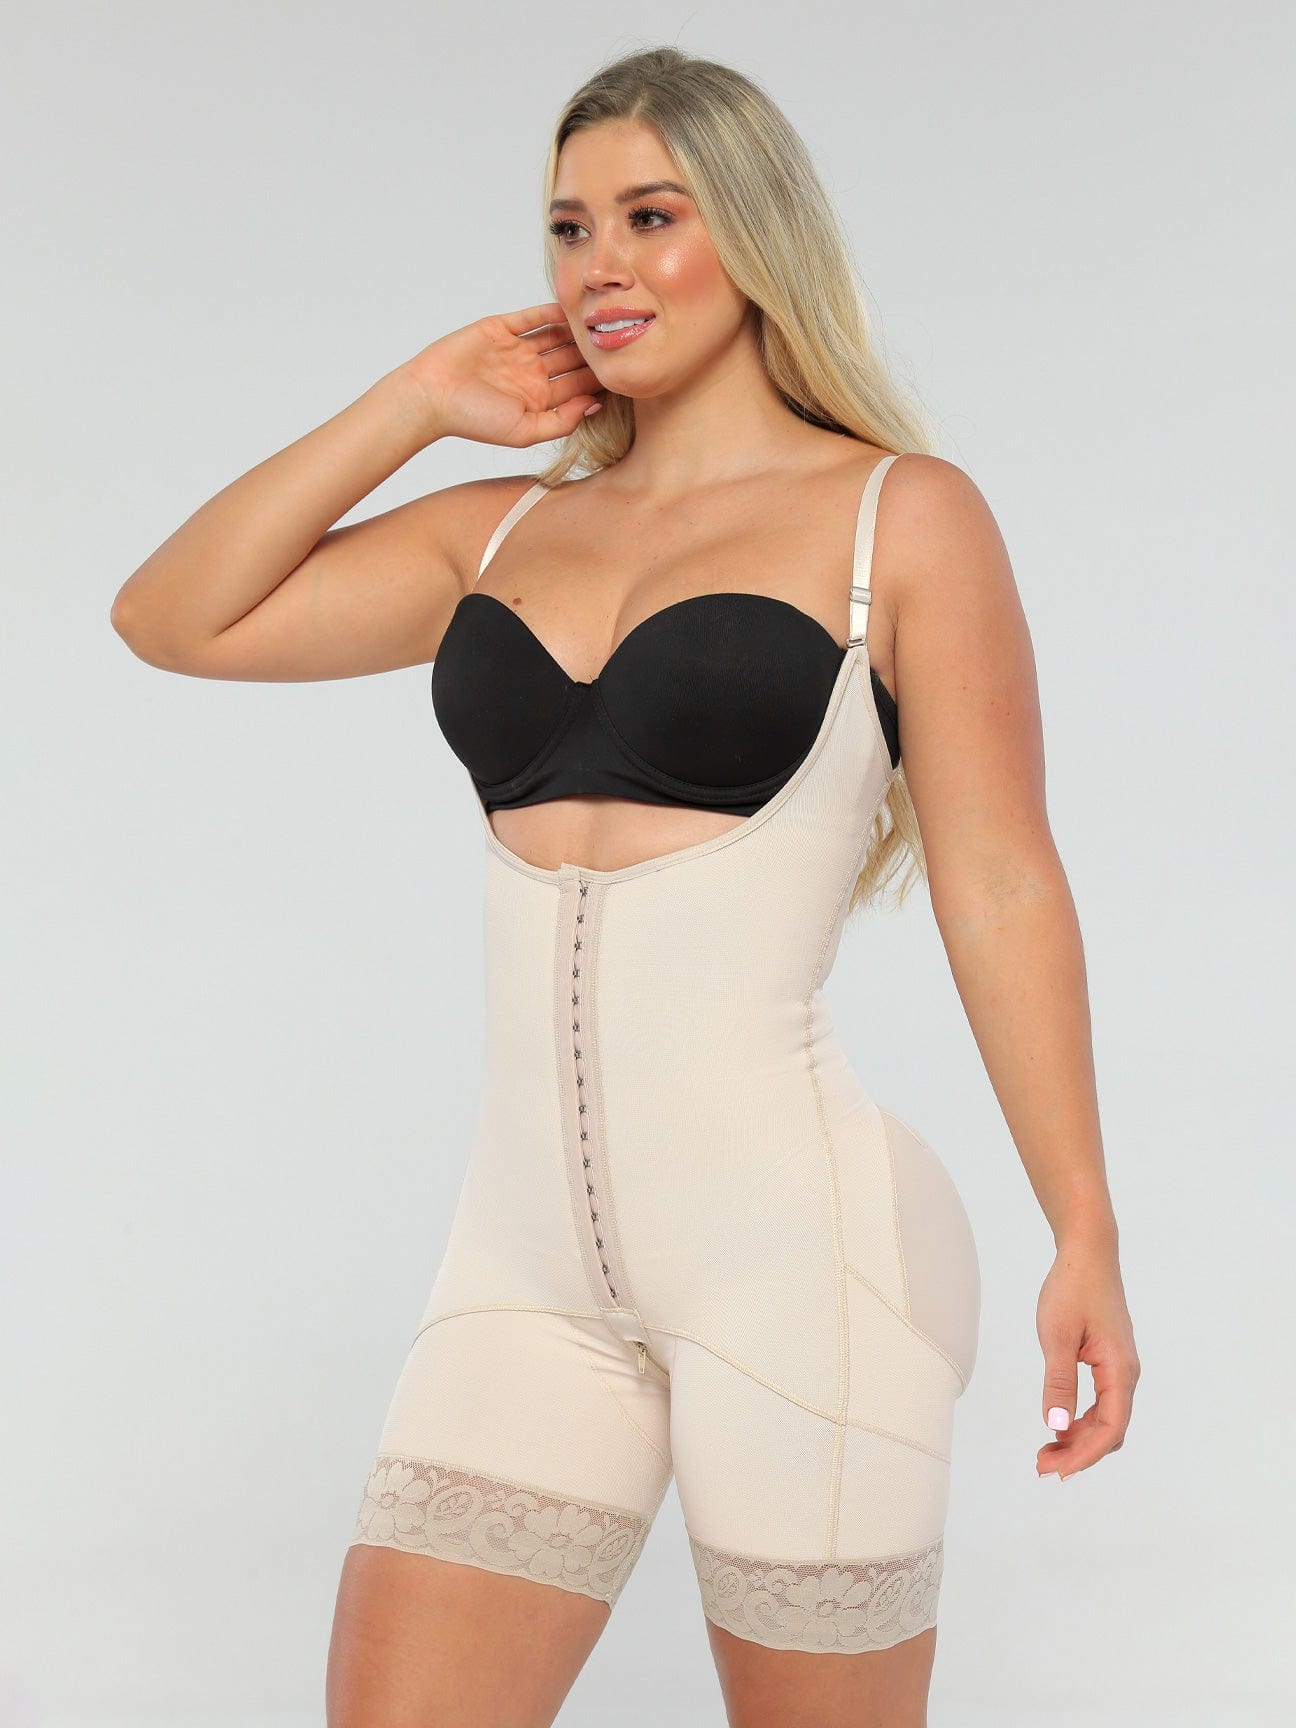 Snatched Body Luxe Faja with Hooks CB452